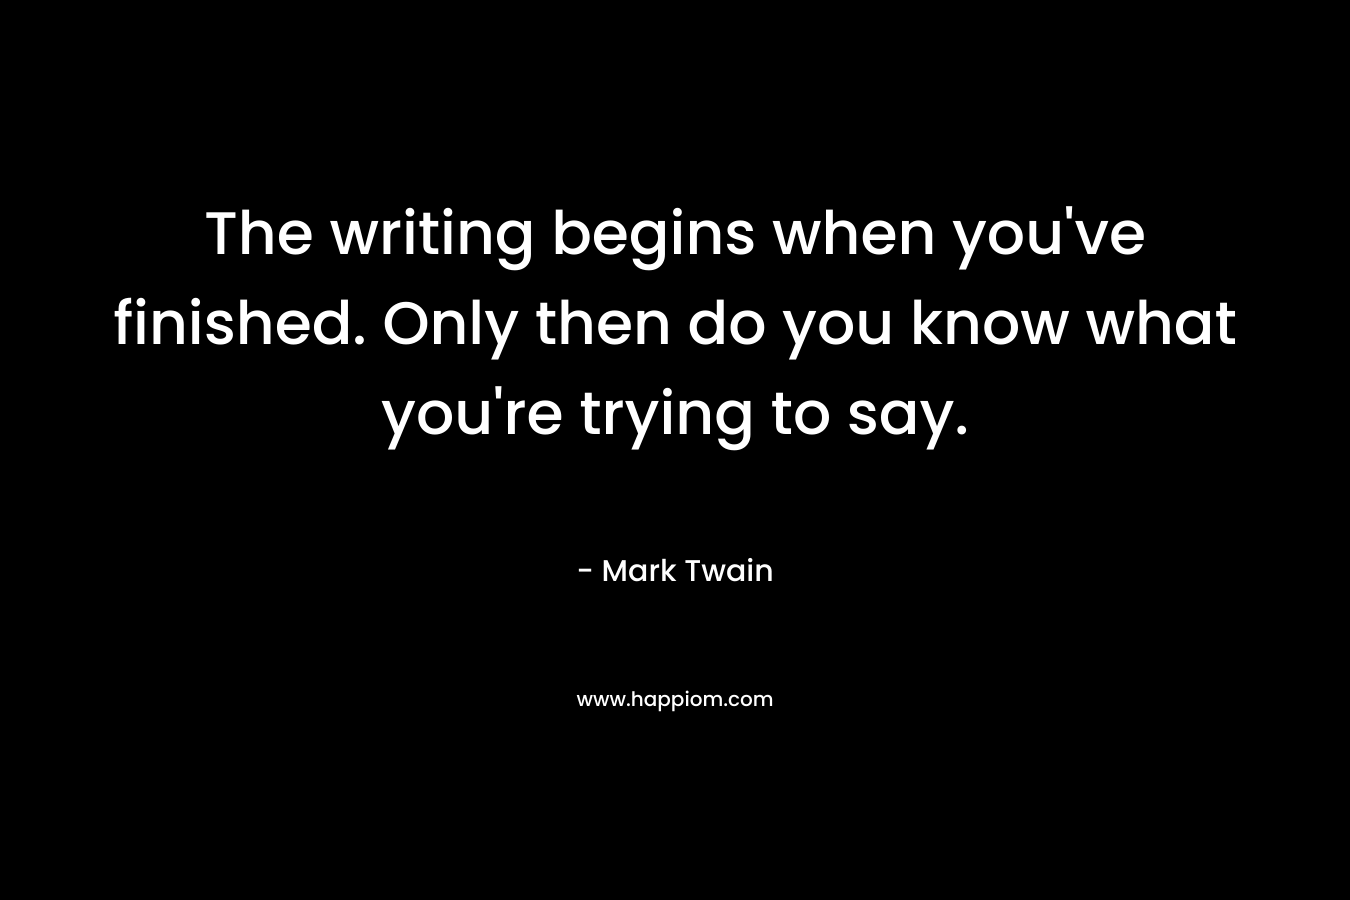 The writing begins when you’ve finished. Only then do you know what you’re trying to say. – Mark Twain